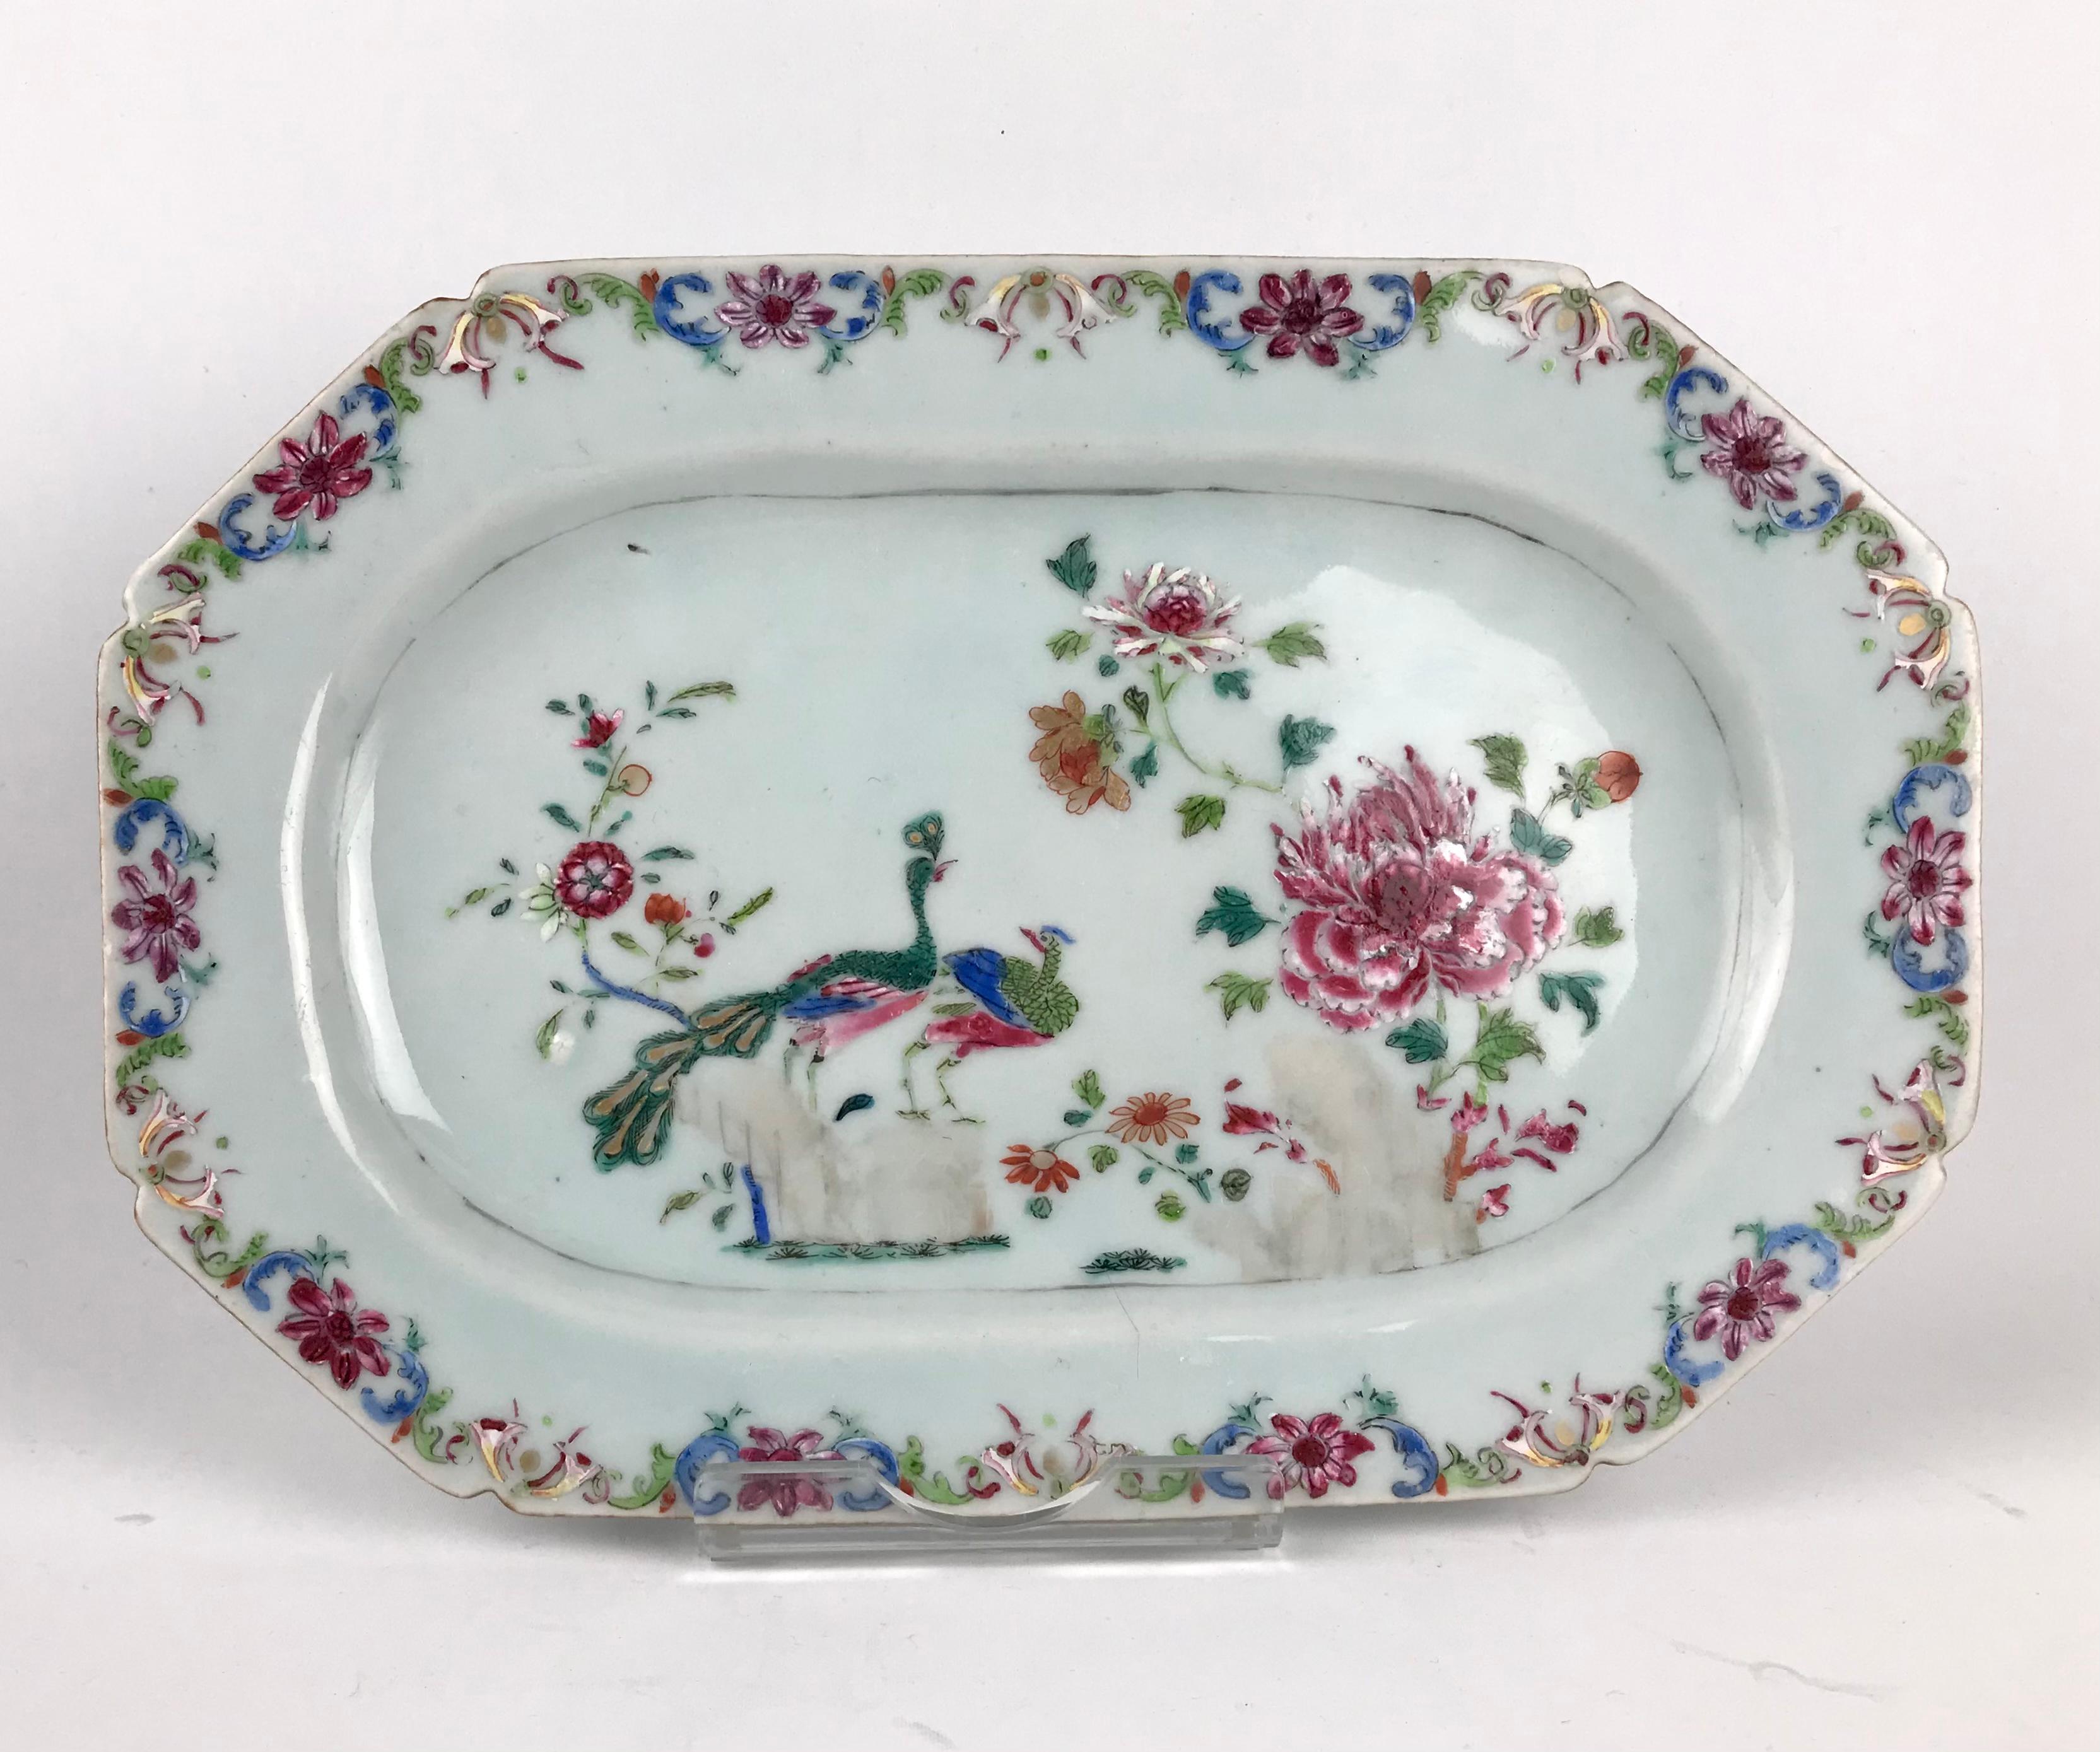 2 Superb Chinese 18th Porcelain Double Peacock Platter Famille Rose Qianlong 1